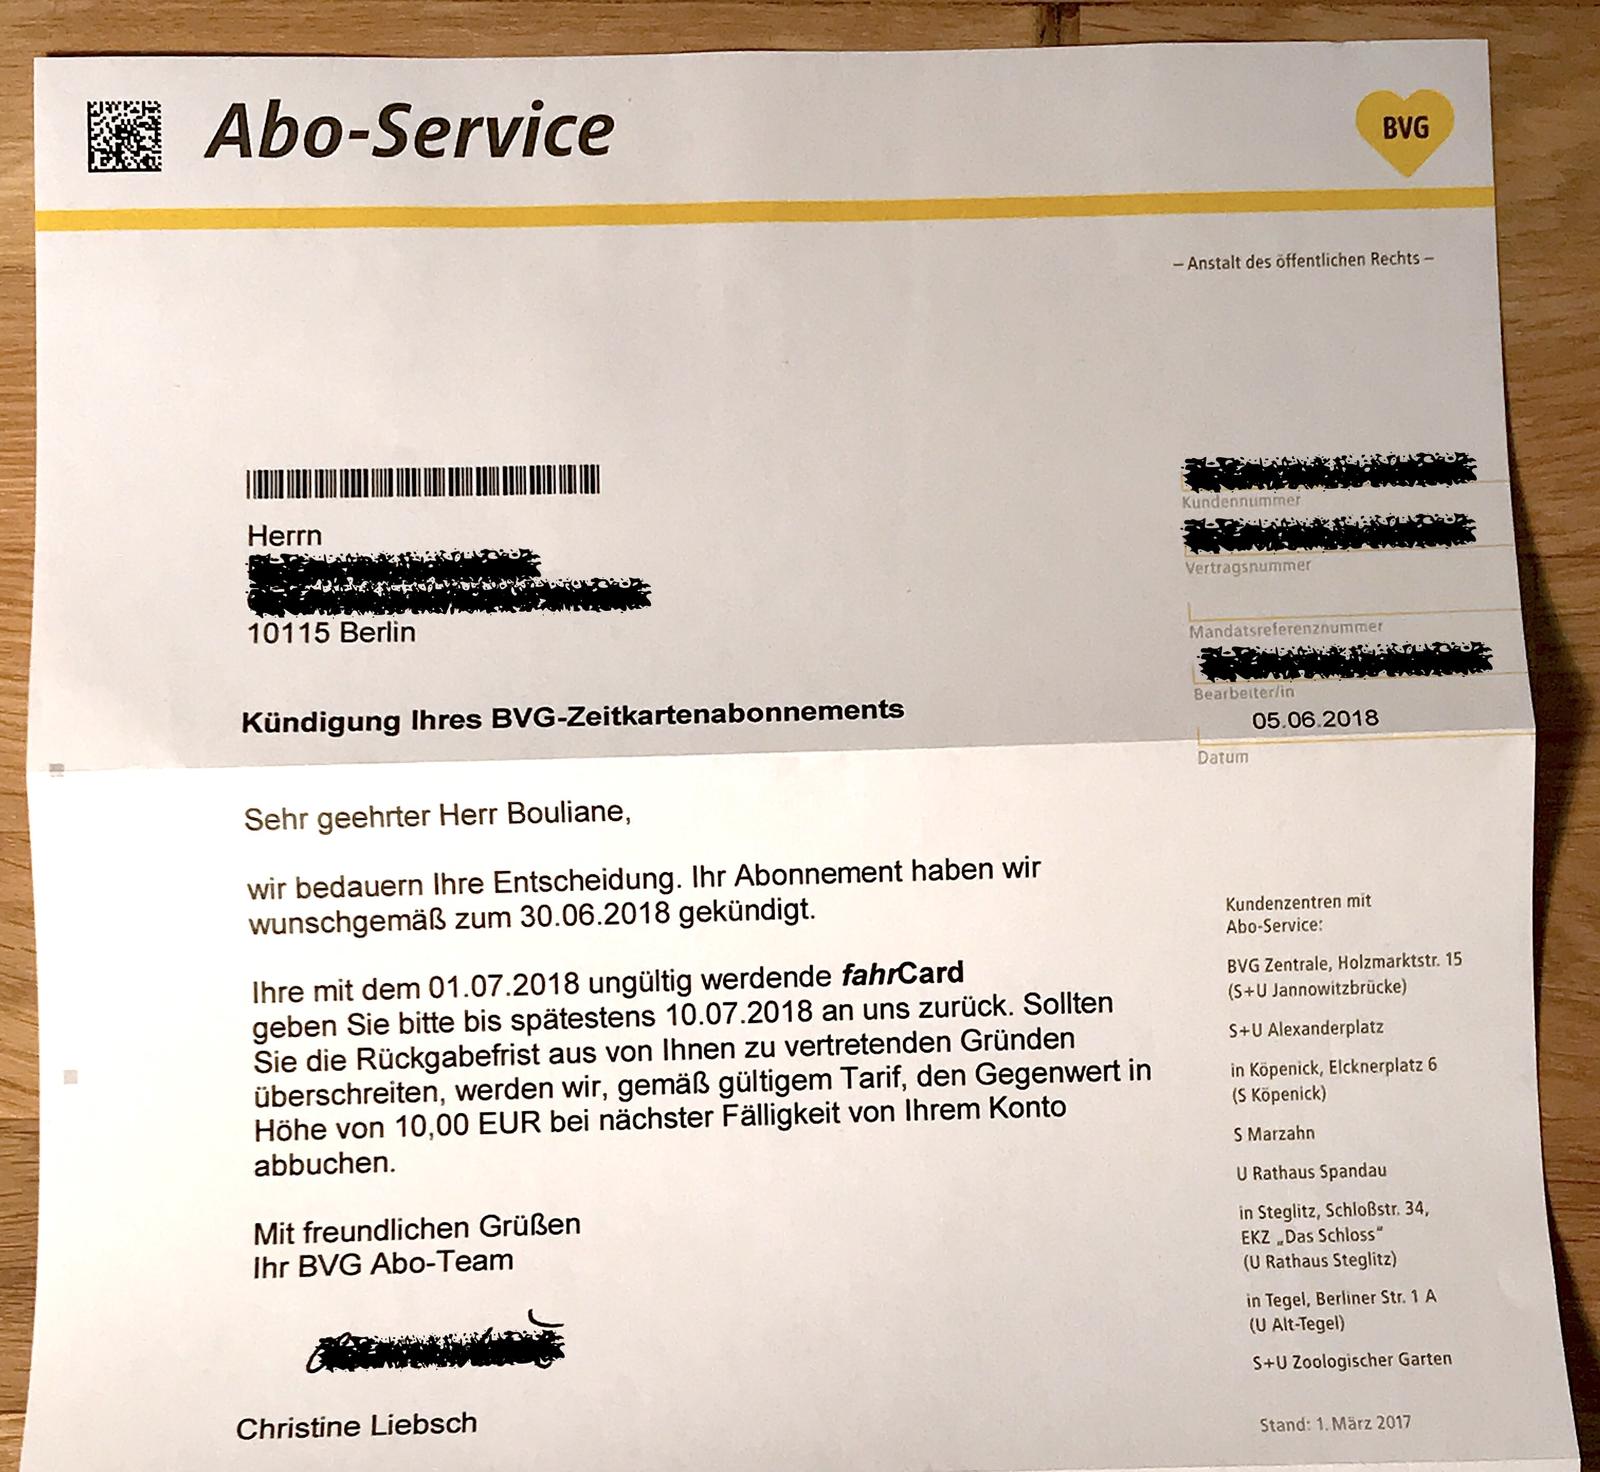 Confirmation letter after cancelling a BVG Abo